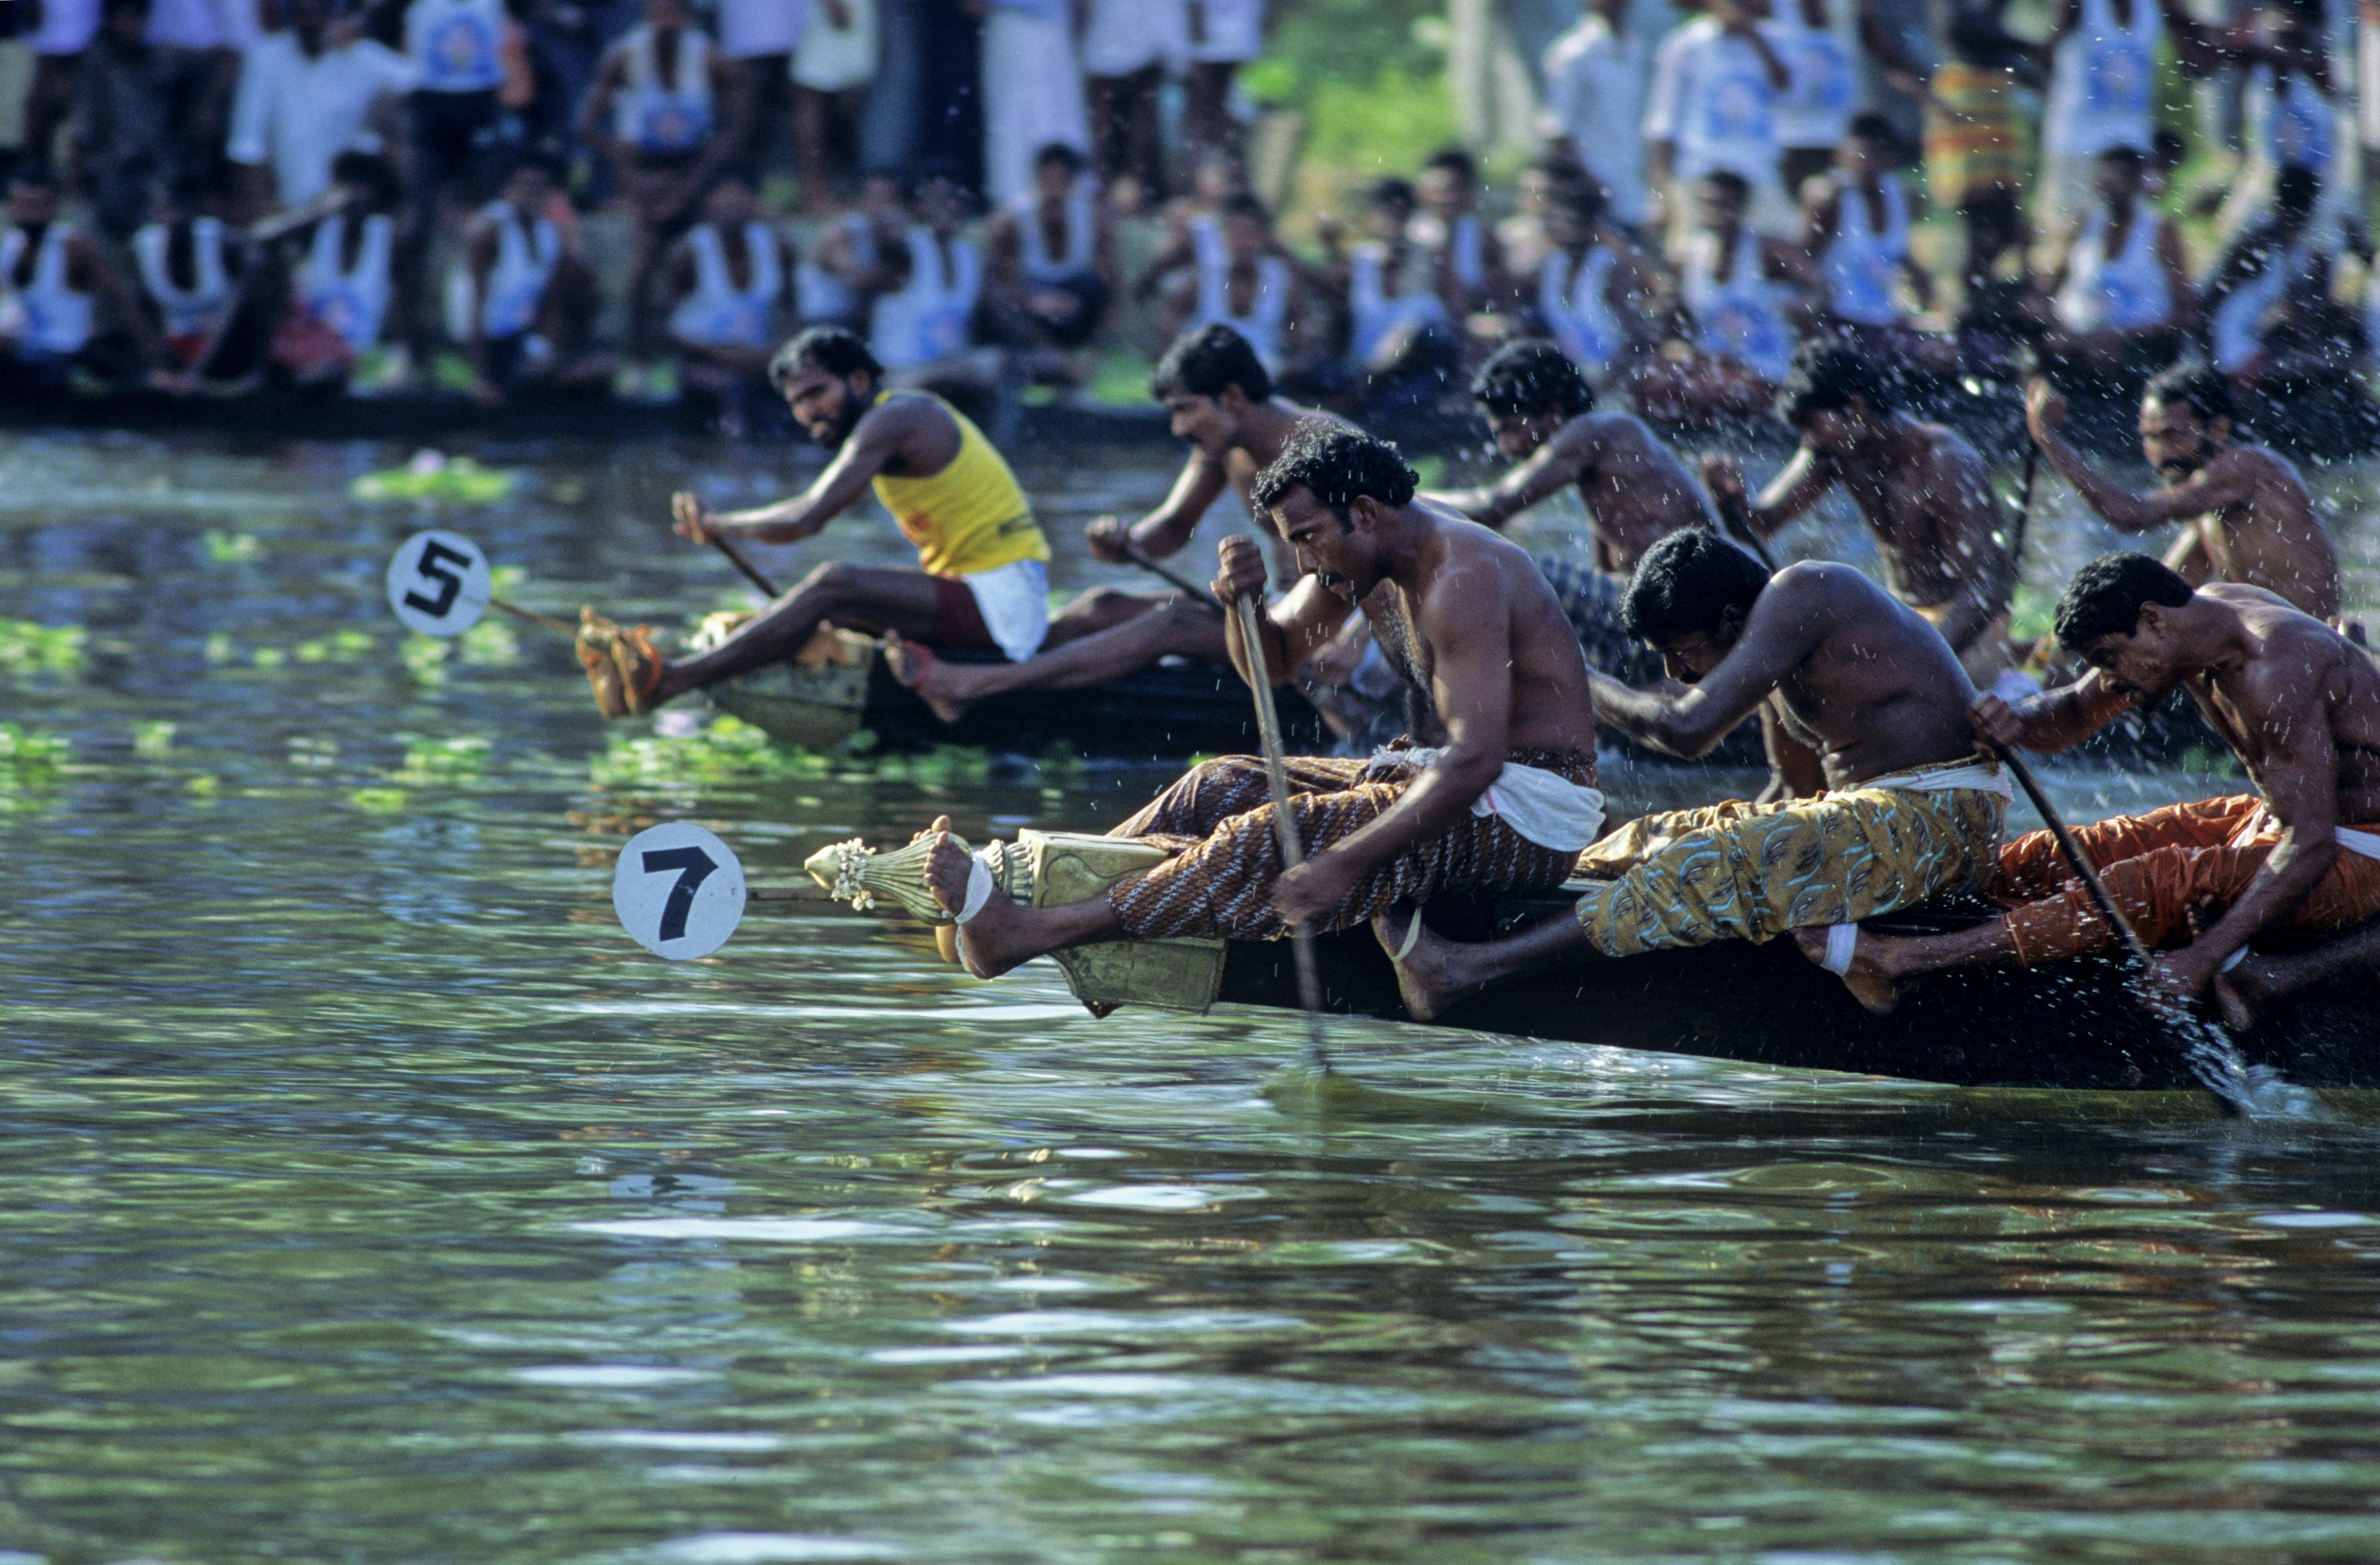 A side view of two snake boats racing in Kerala. The race and neck, and the lead rower in the far boat is looking over to check whether his team is in the lead.